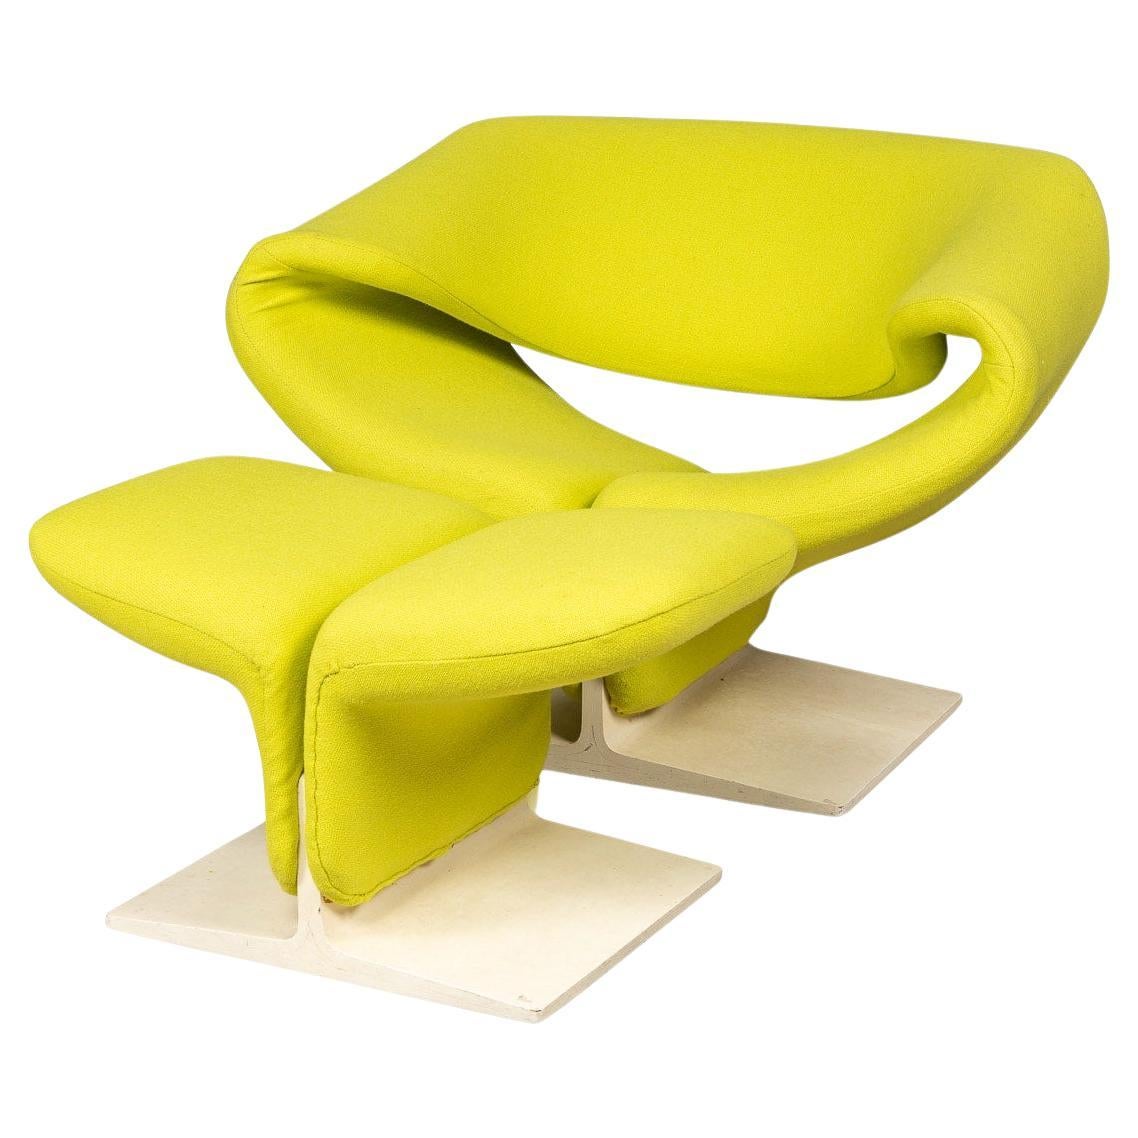 20th Century Ribbon Chair & Footstall By Pierre Paulin For Artifort, France